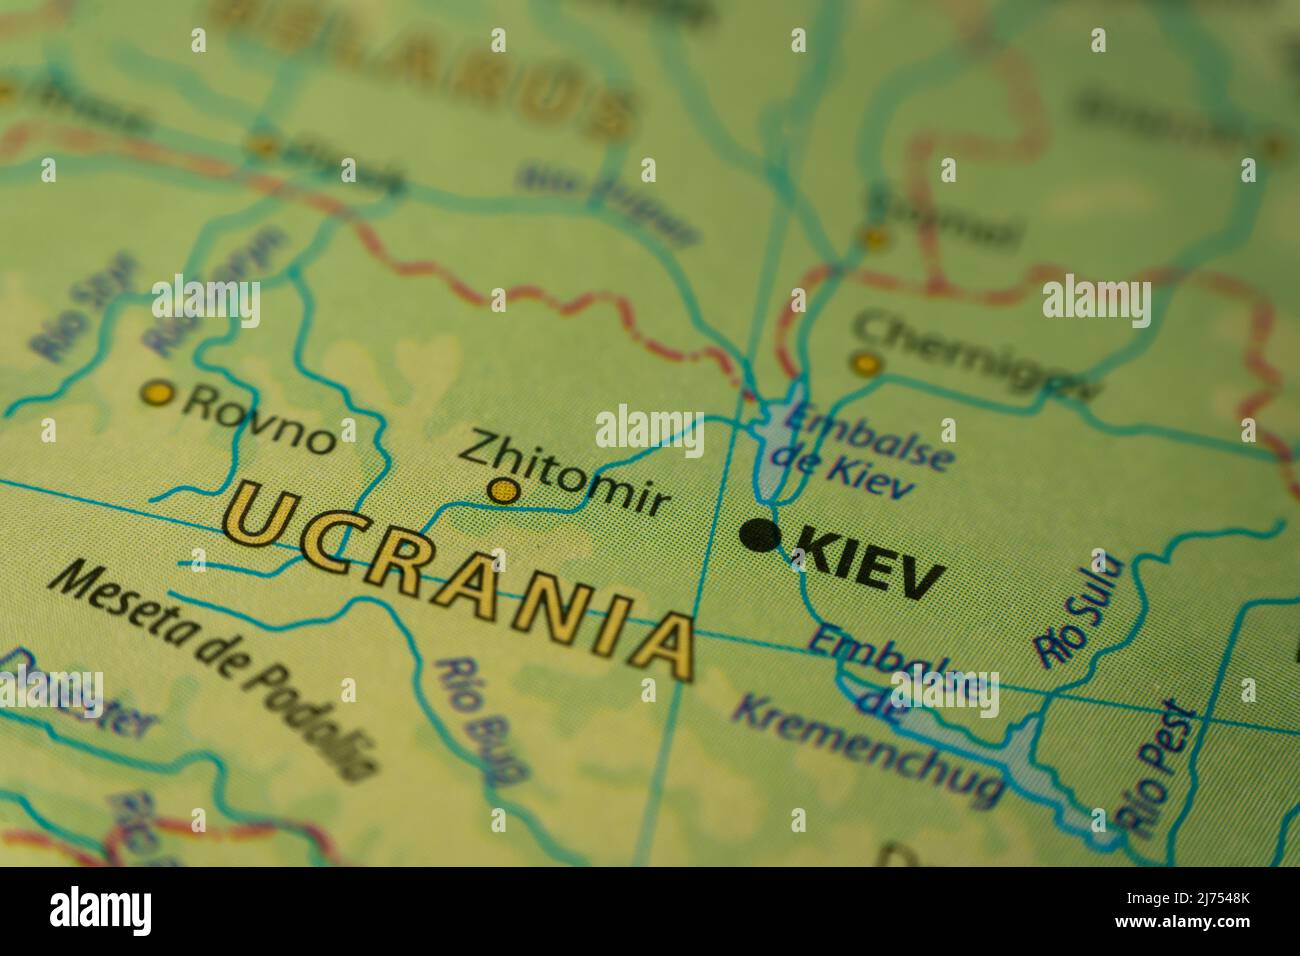 Orographic map of Northern Ukraine and Kiev region. With references in Spanish. Concept of cartography, travel, geography. Differentiated focus Stock Photo